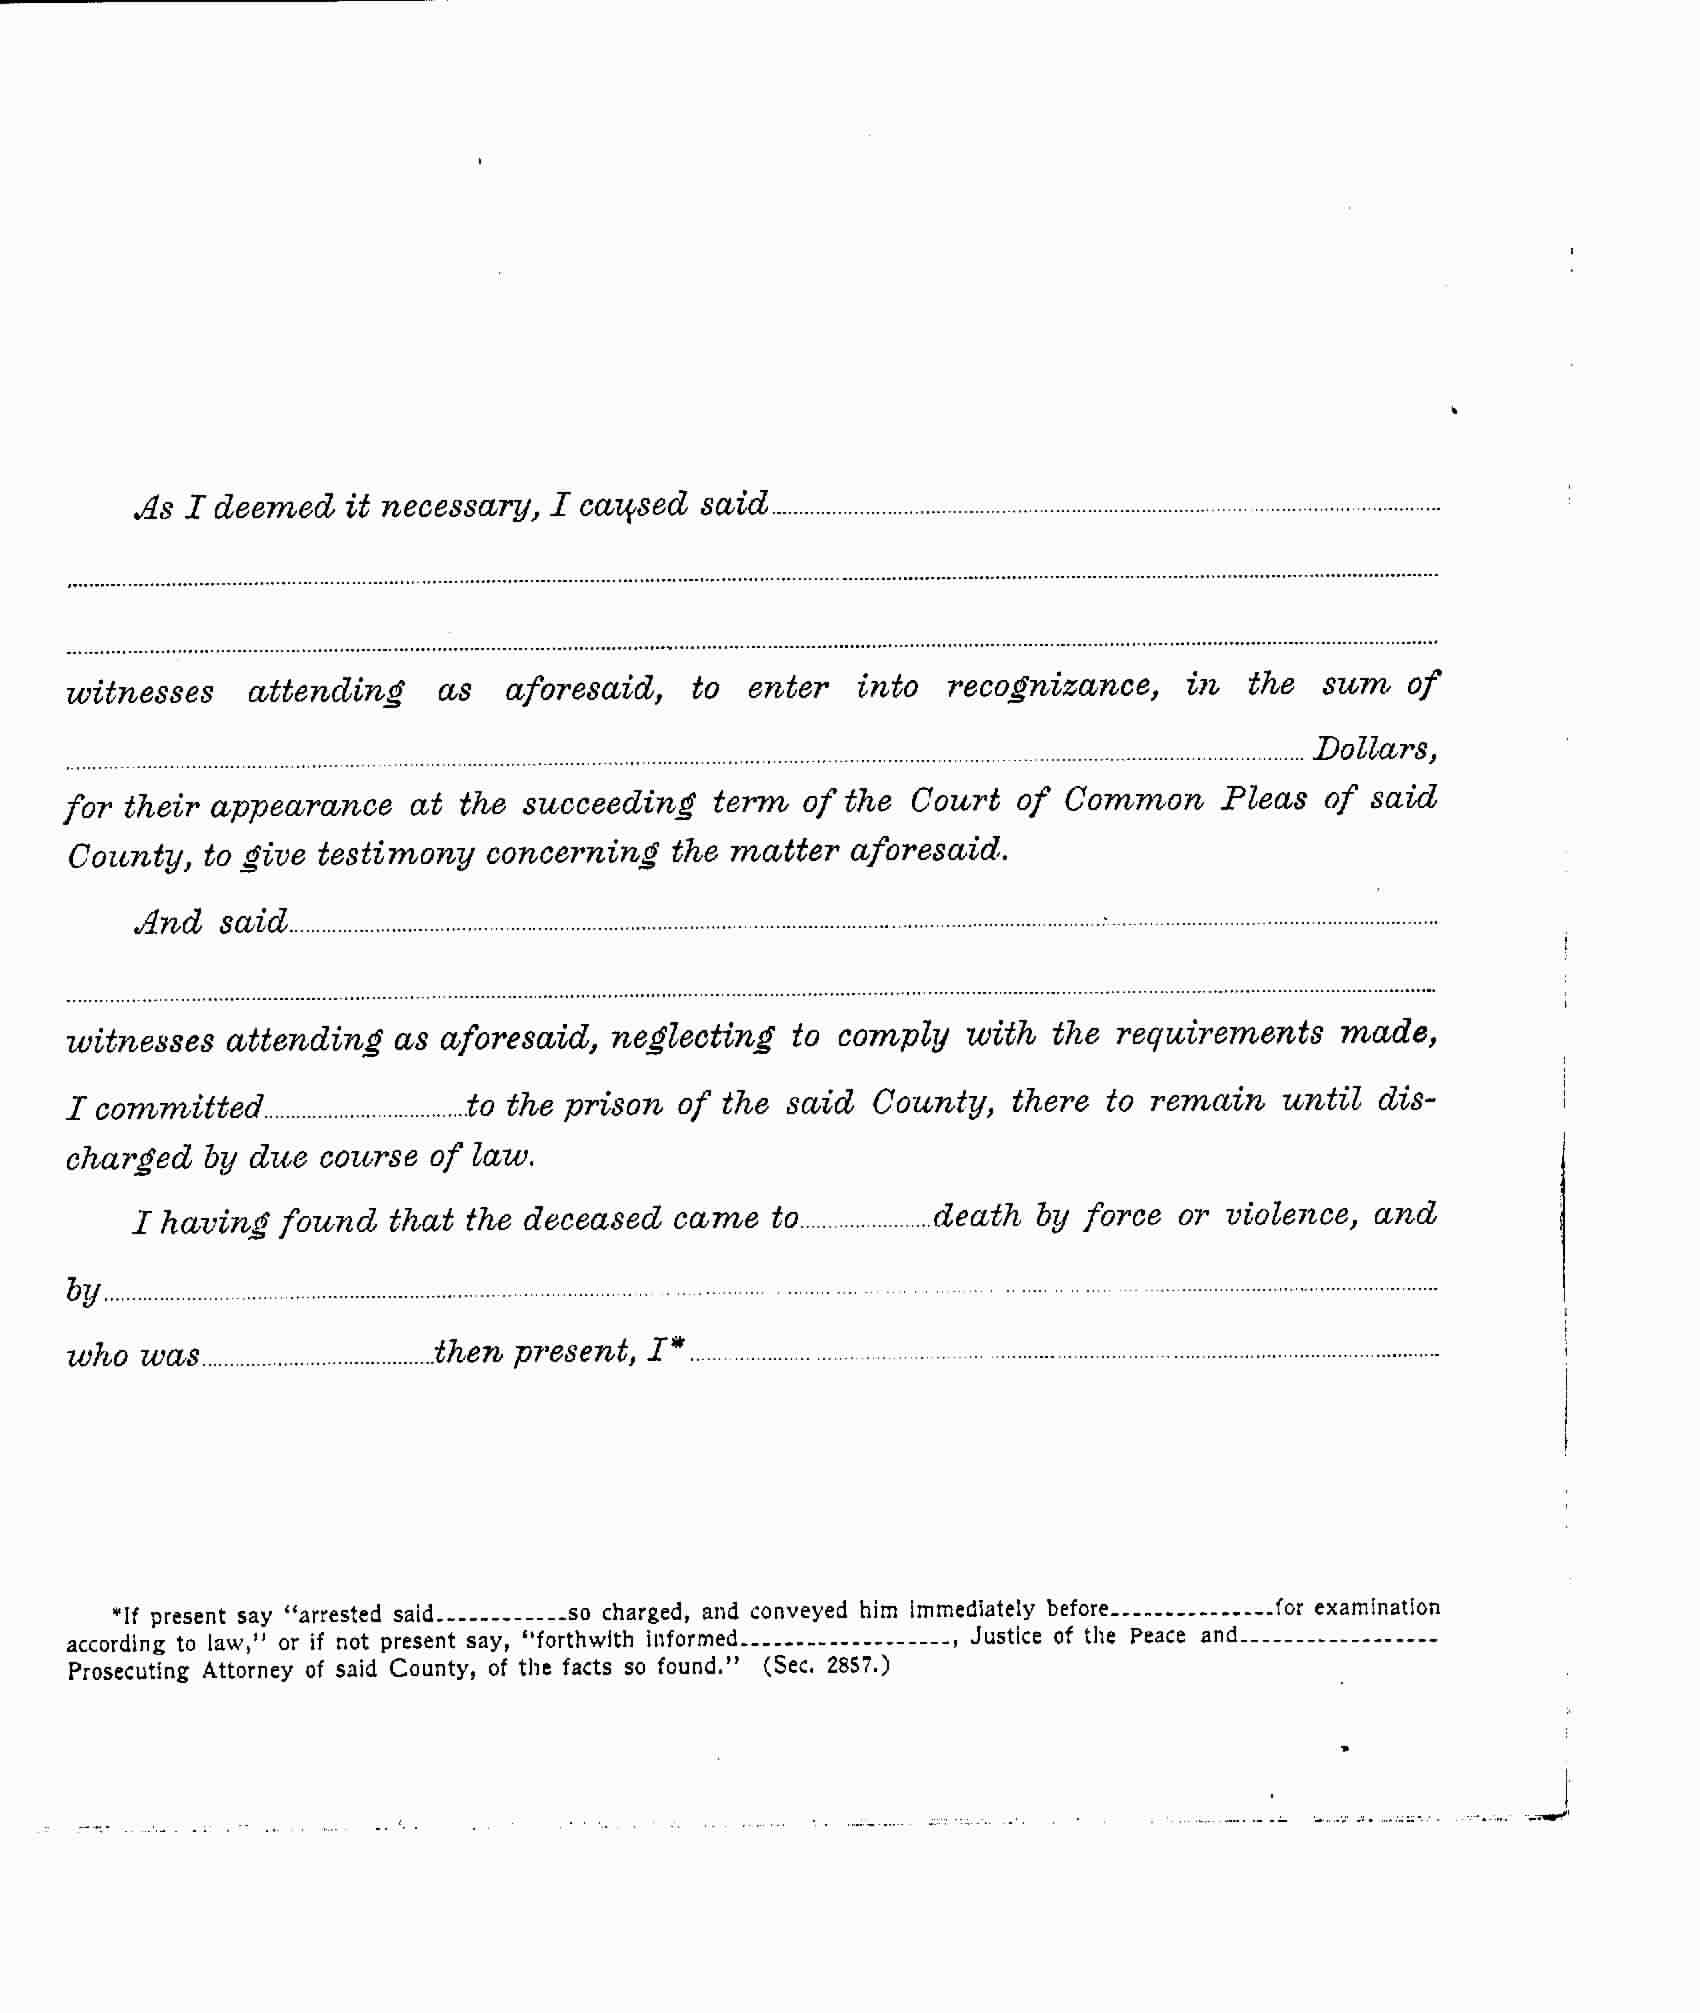 Page 3 of the Coroner's report